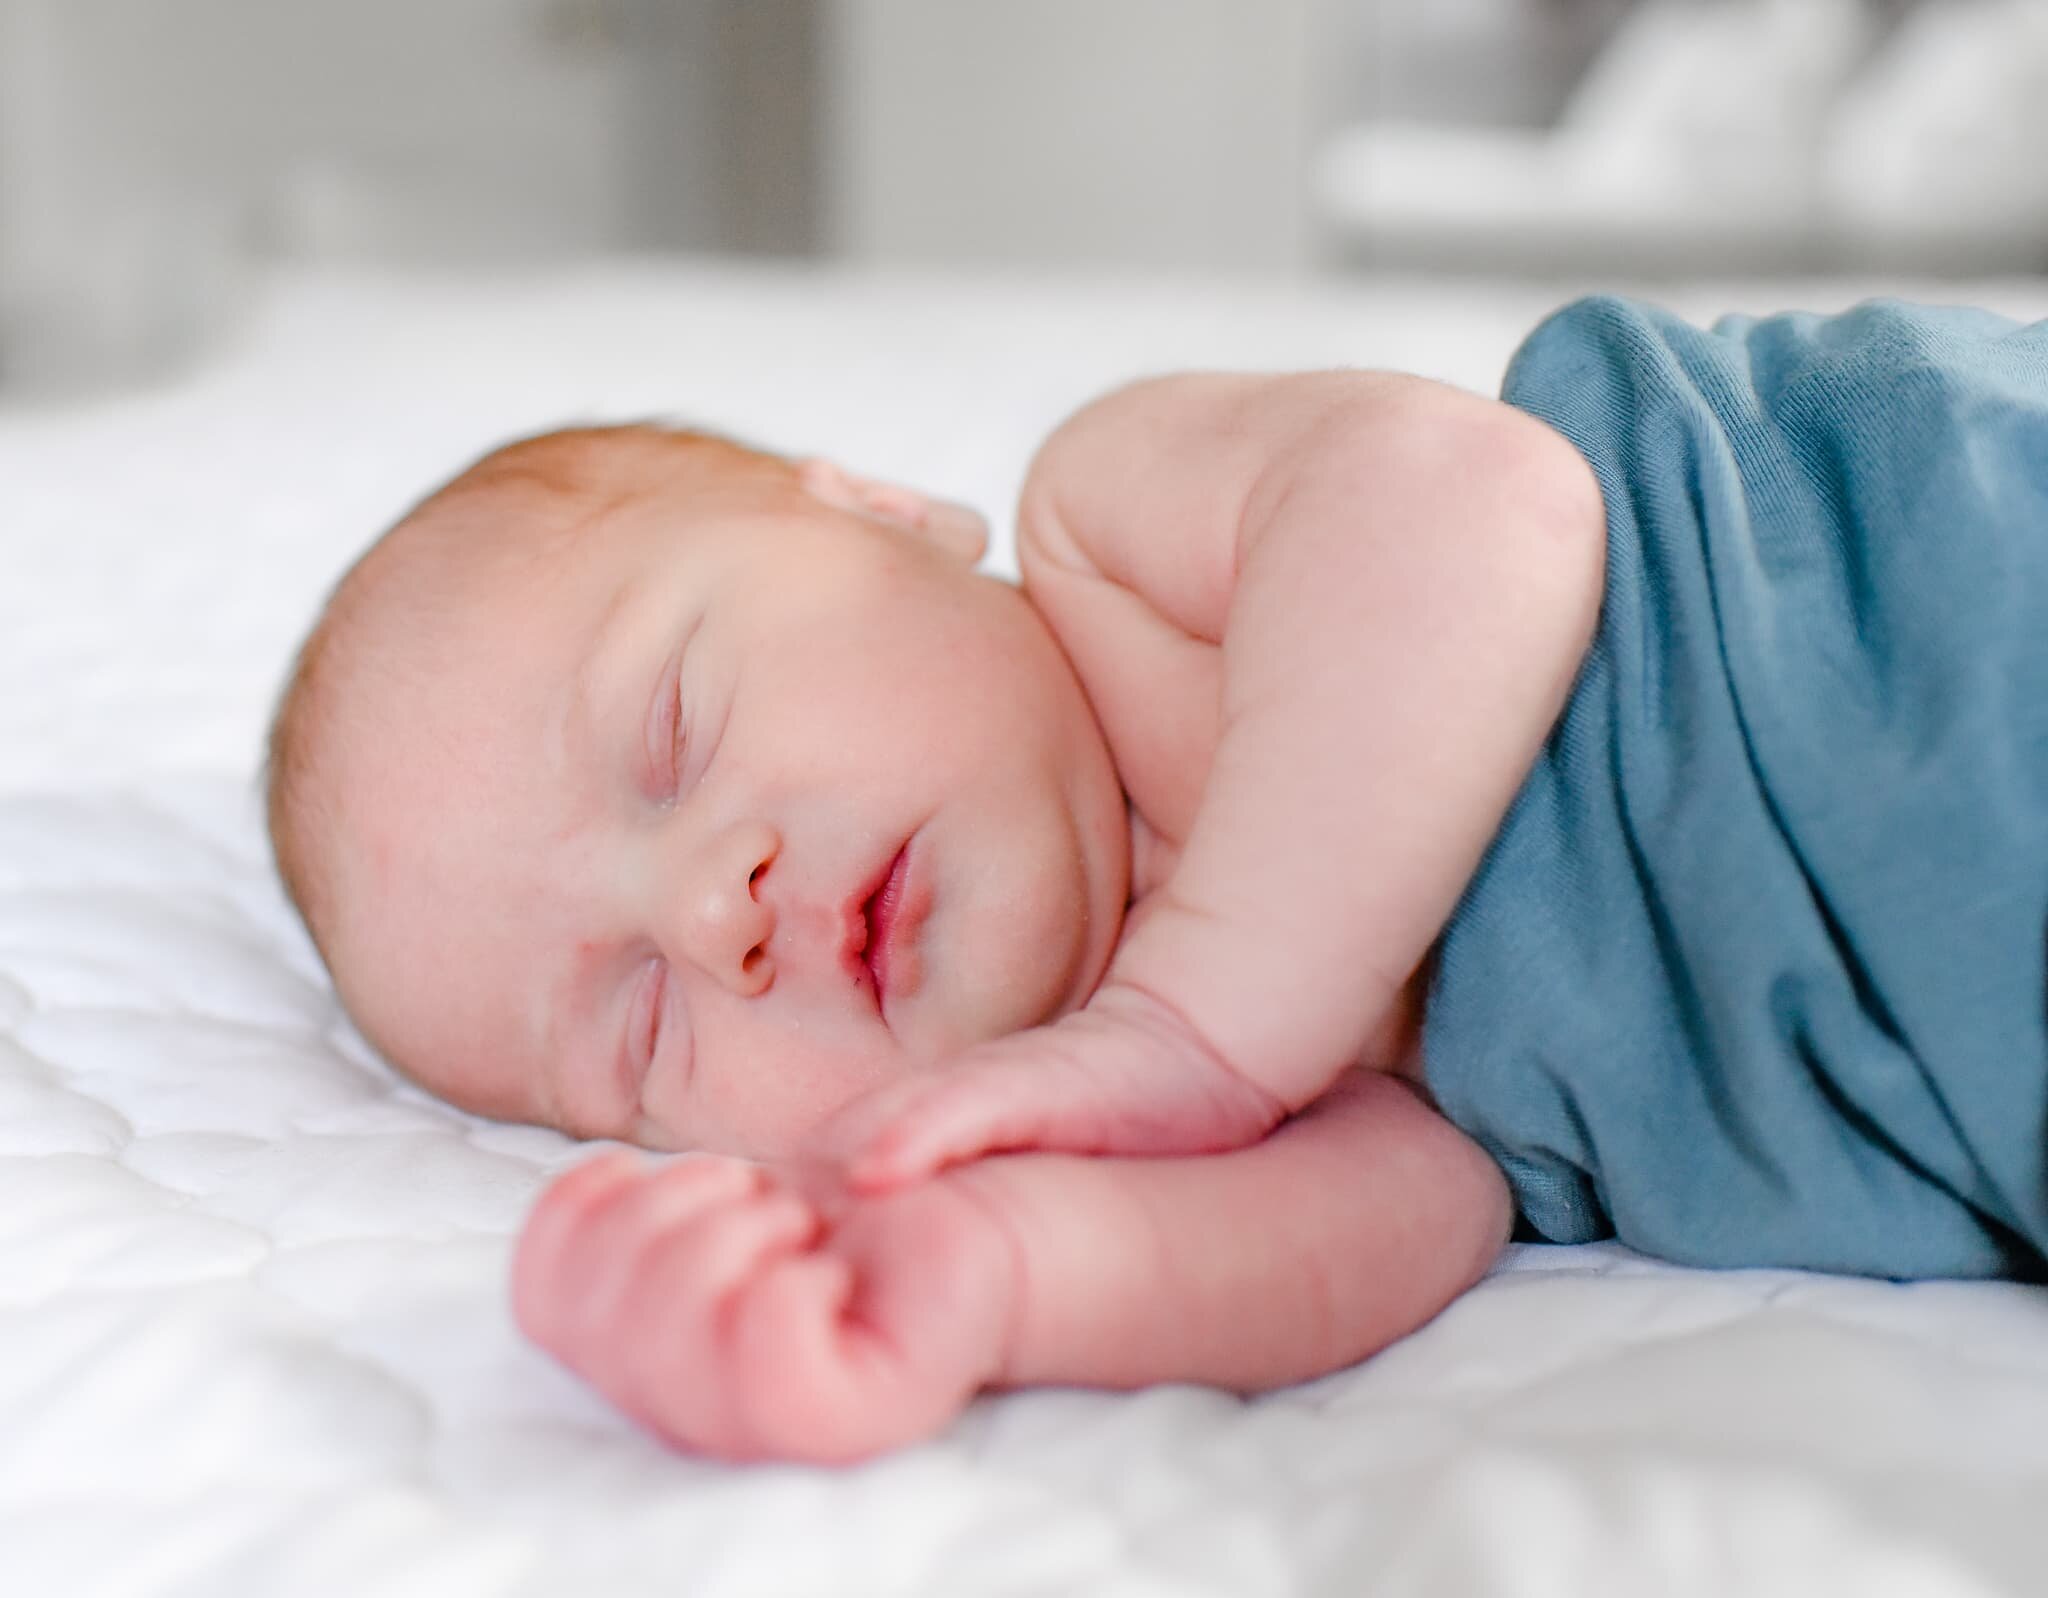 Silver Spring Maryland Newborn Photoshoot - baby curled up on the bed